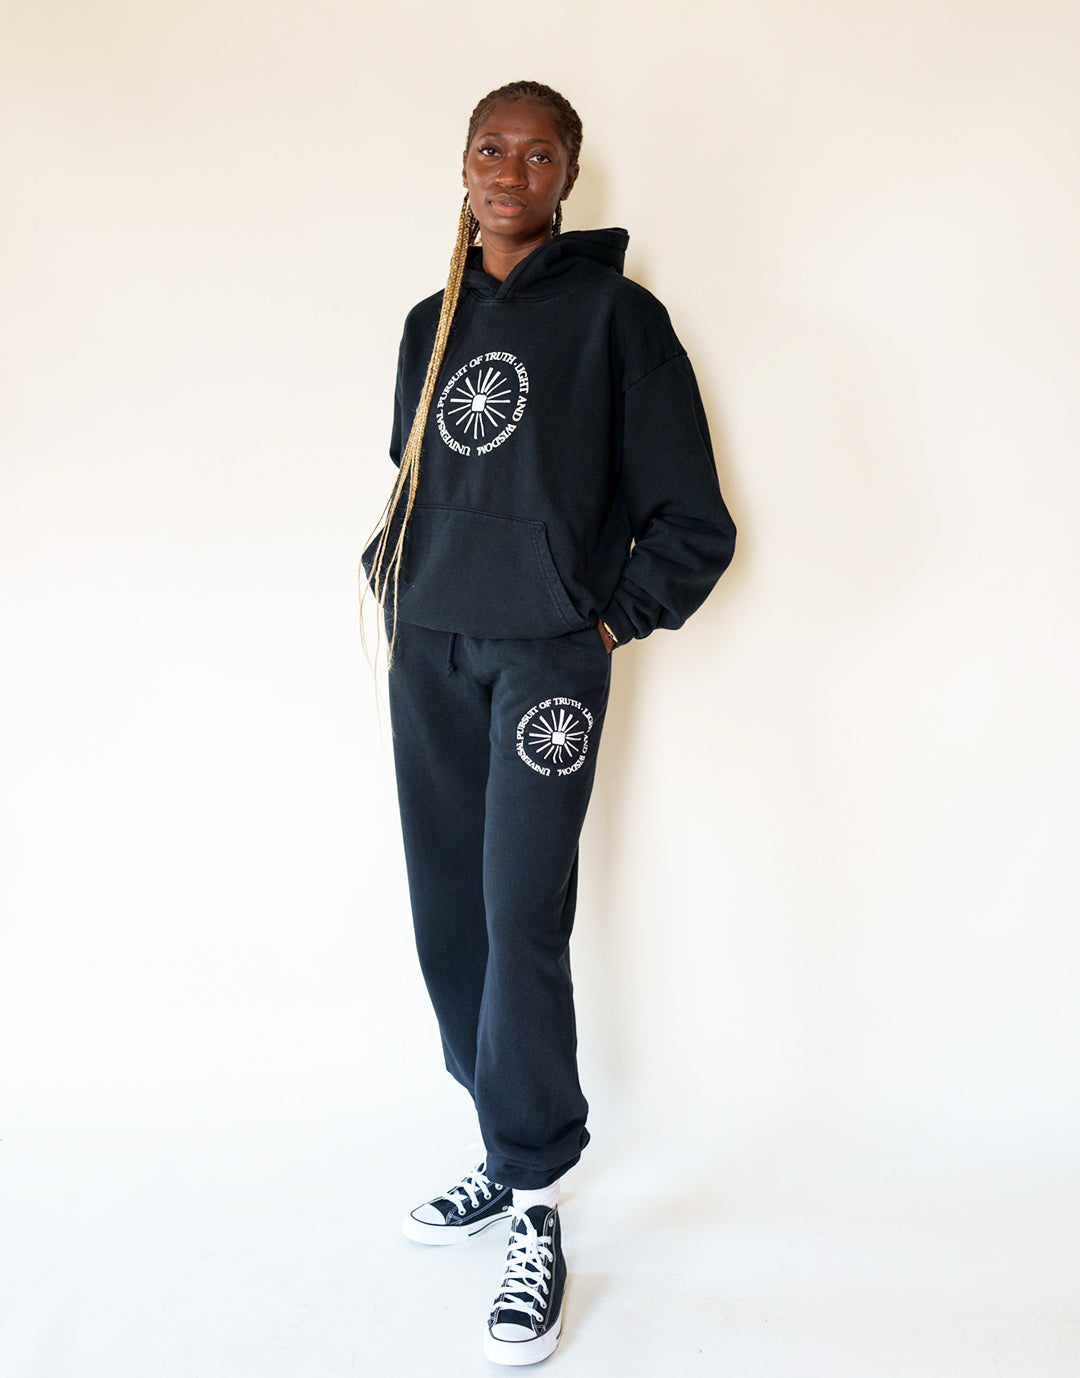 Model wears Universal Pursuit Hoodie in size Small. 100% Cotton French Terry Hooded Sweatshirt in Black Beauty